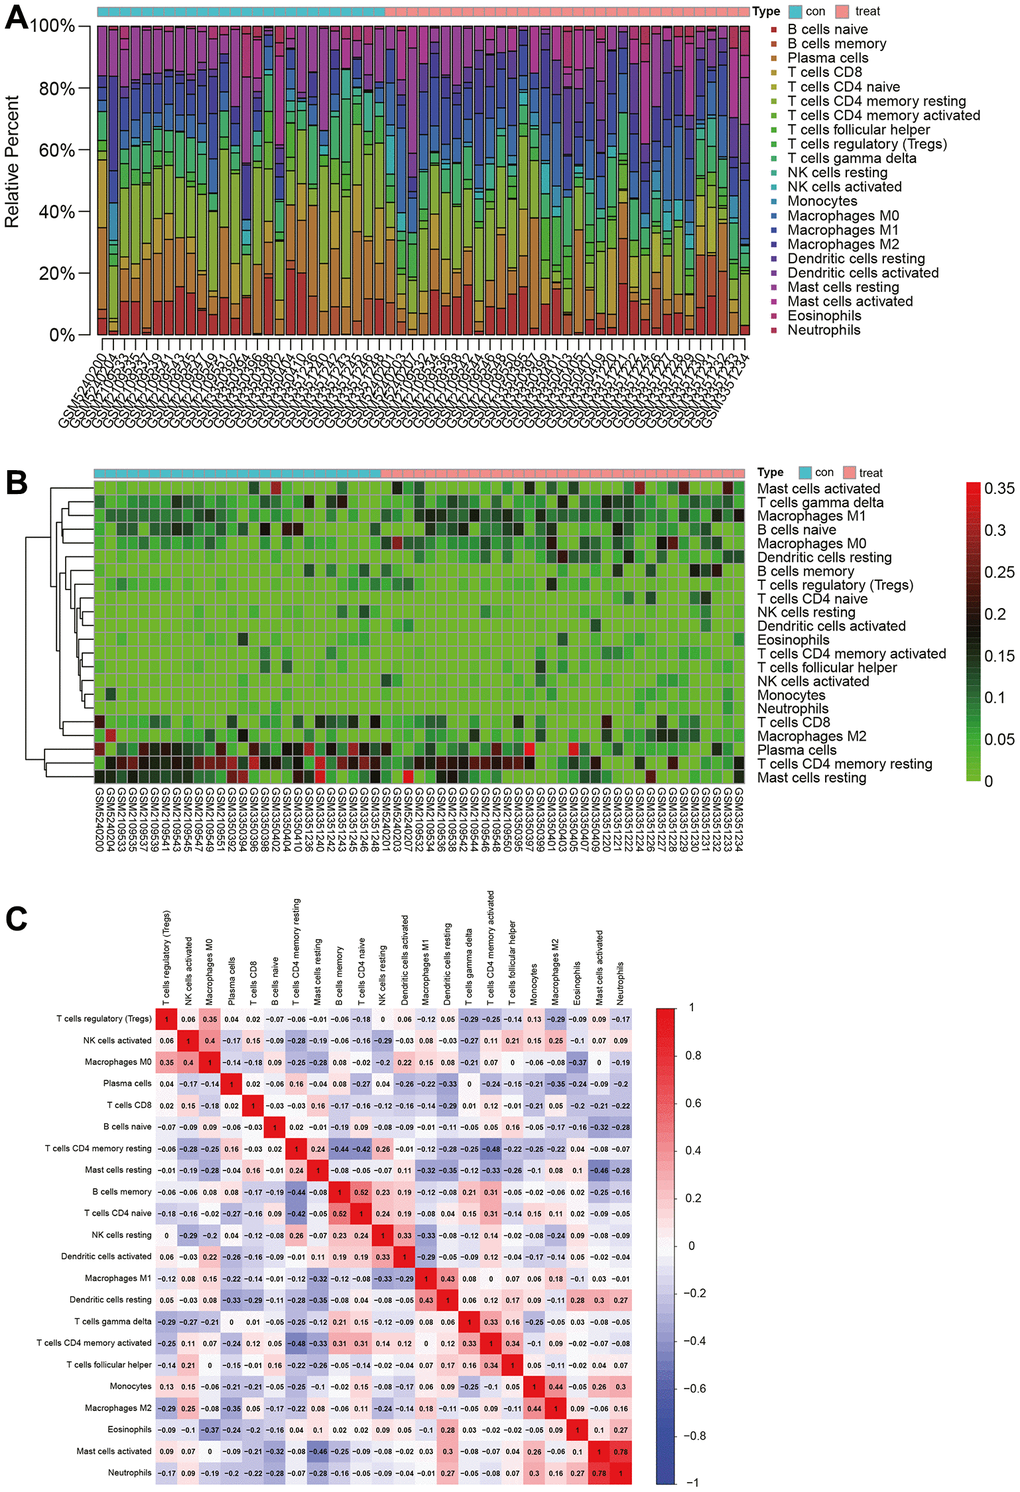 Immune infiltration analysis. (A) Proportion of naive CD4 T cells in samples. (B) Heatmap of immune cell expression levels. (C) Analysis of immune cell correlations.